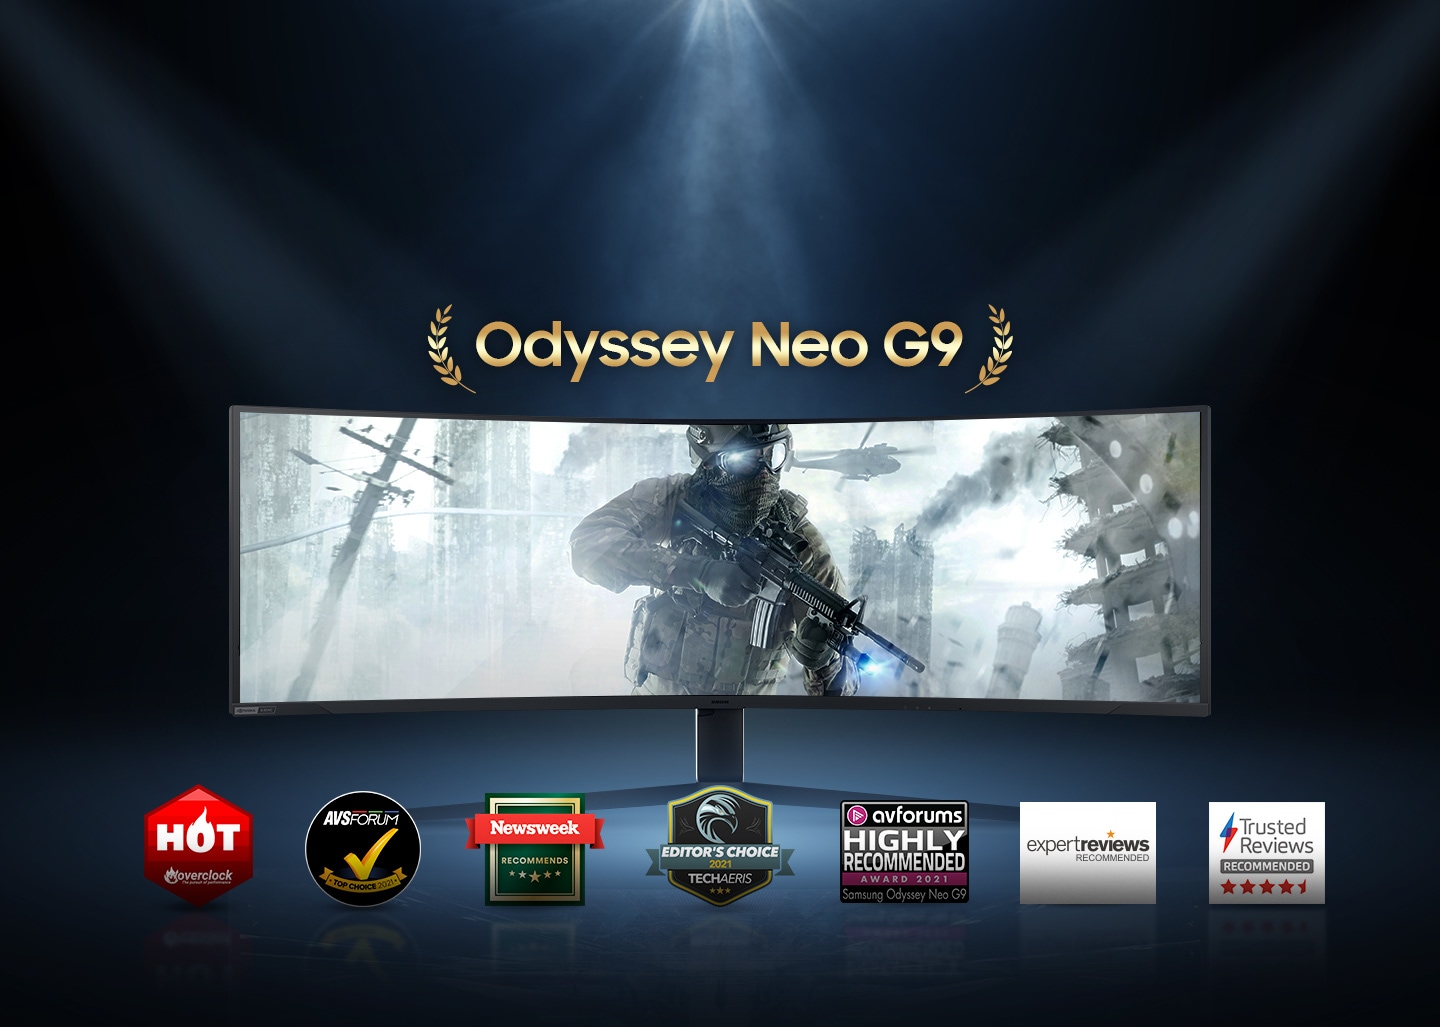 Lights which comes from top to bottom illuminates a place where Odyssey Neo G9 is placed.Above the monitor. †Odyssey Neo G9' is written in gold with laurel on each side.On the onscreen, a soldier is fighting with a gun in his hand on the battlefield. Award logos from Overclock, AVS forum, Newsweek, Techaeris, AV forums, Trusted Reviews are lining up near the stand.